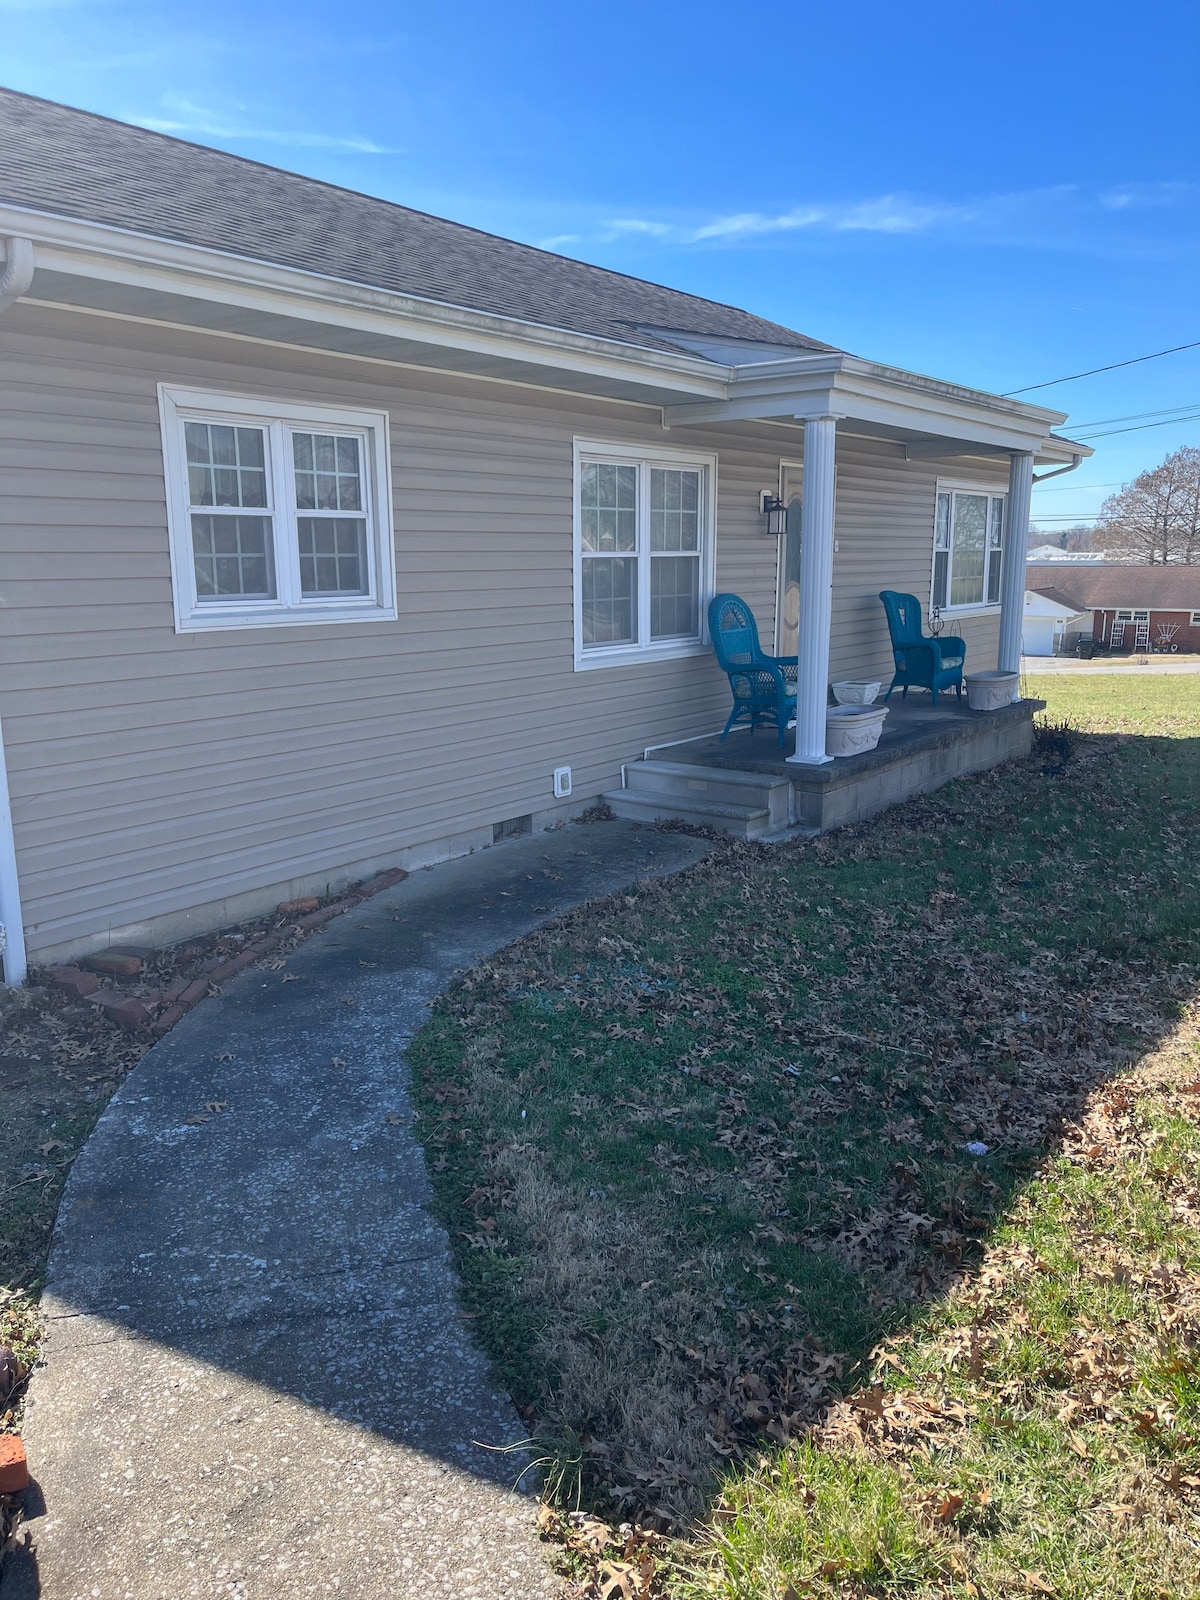 3 Bedroom Close to the Shawnee National Forest